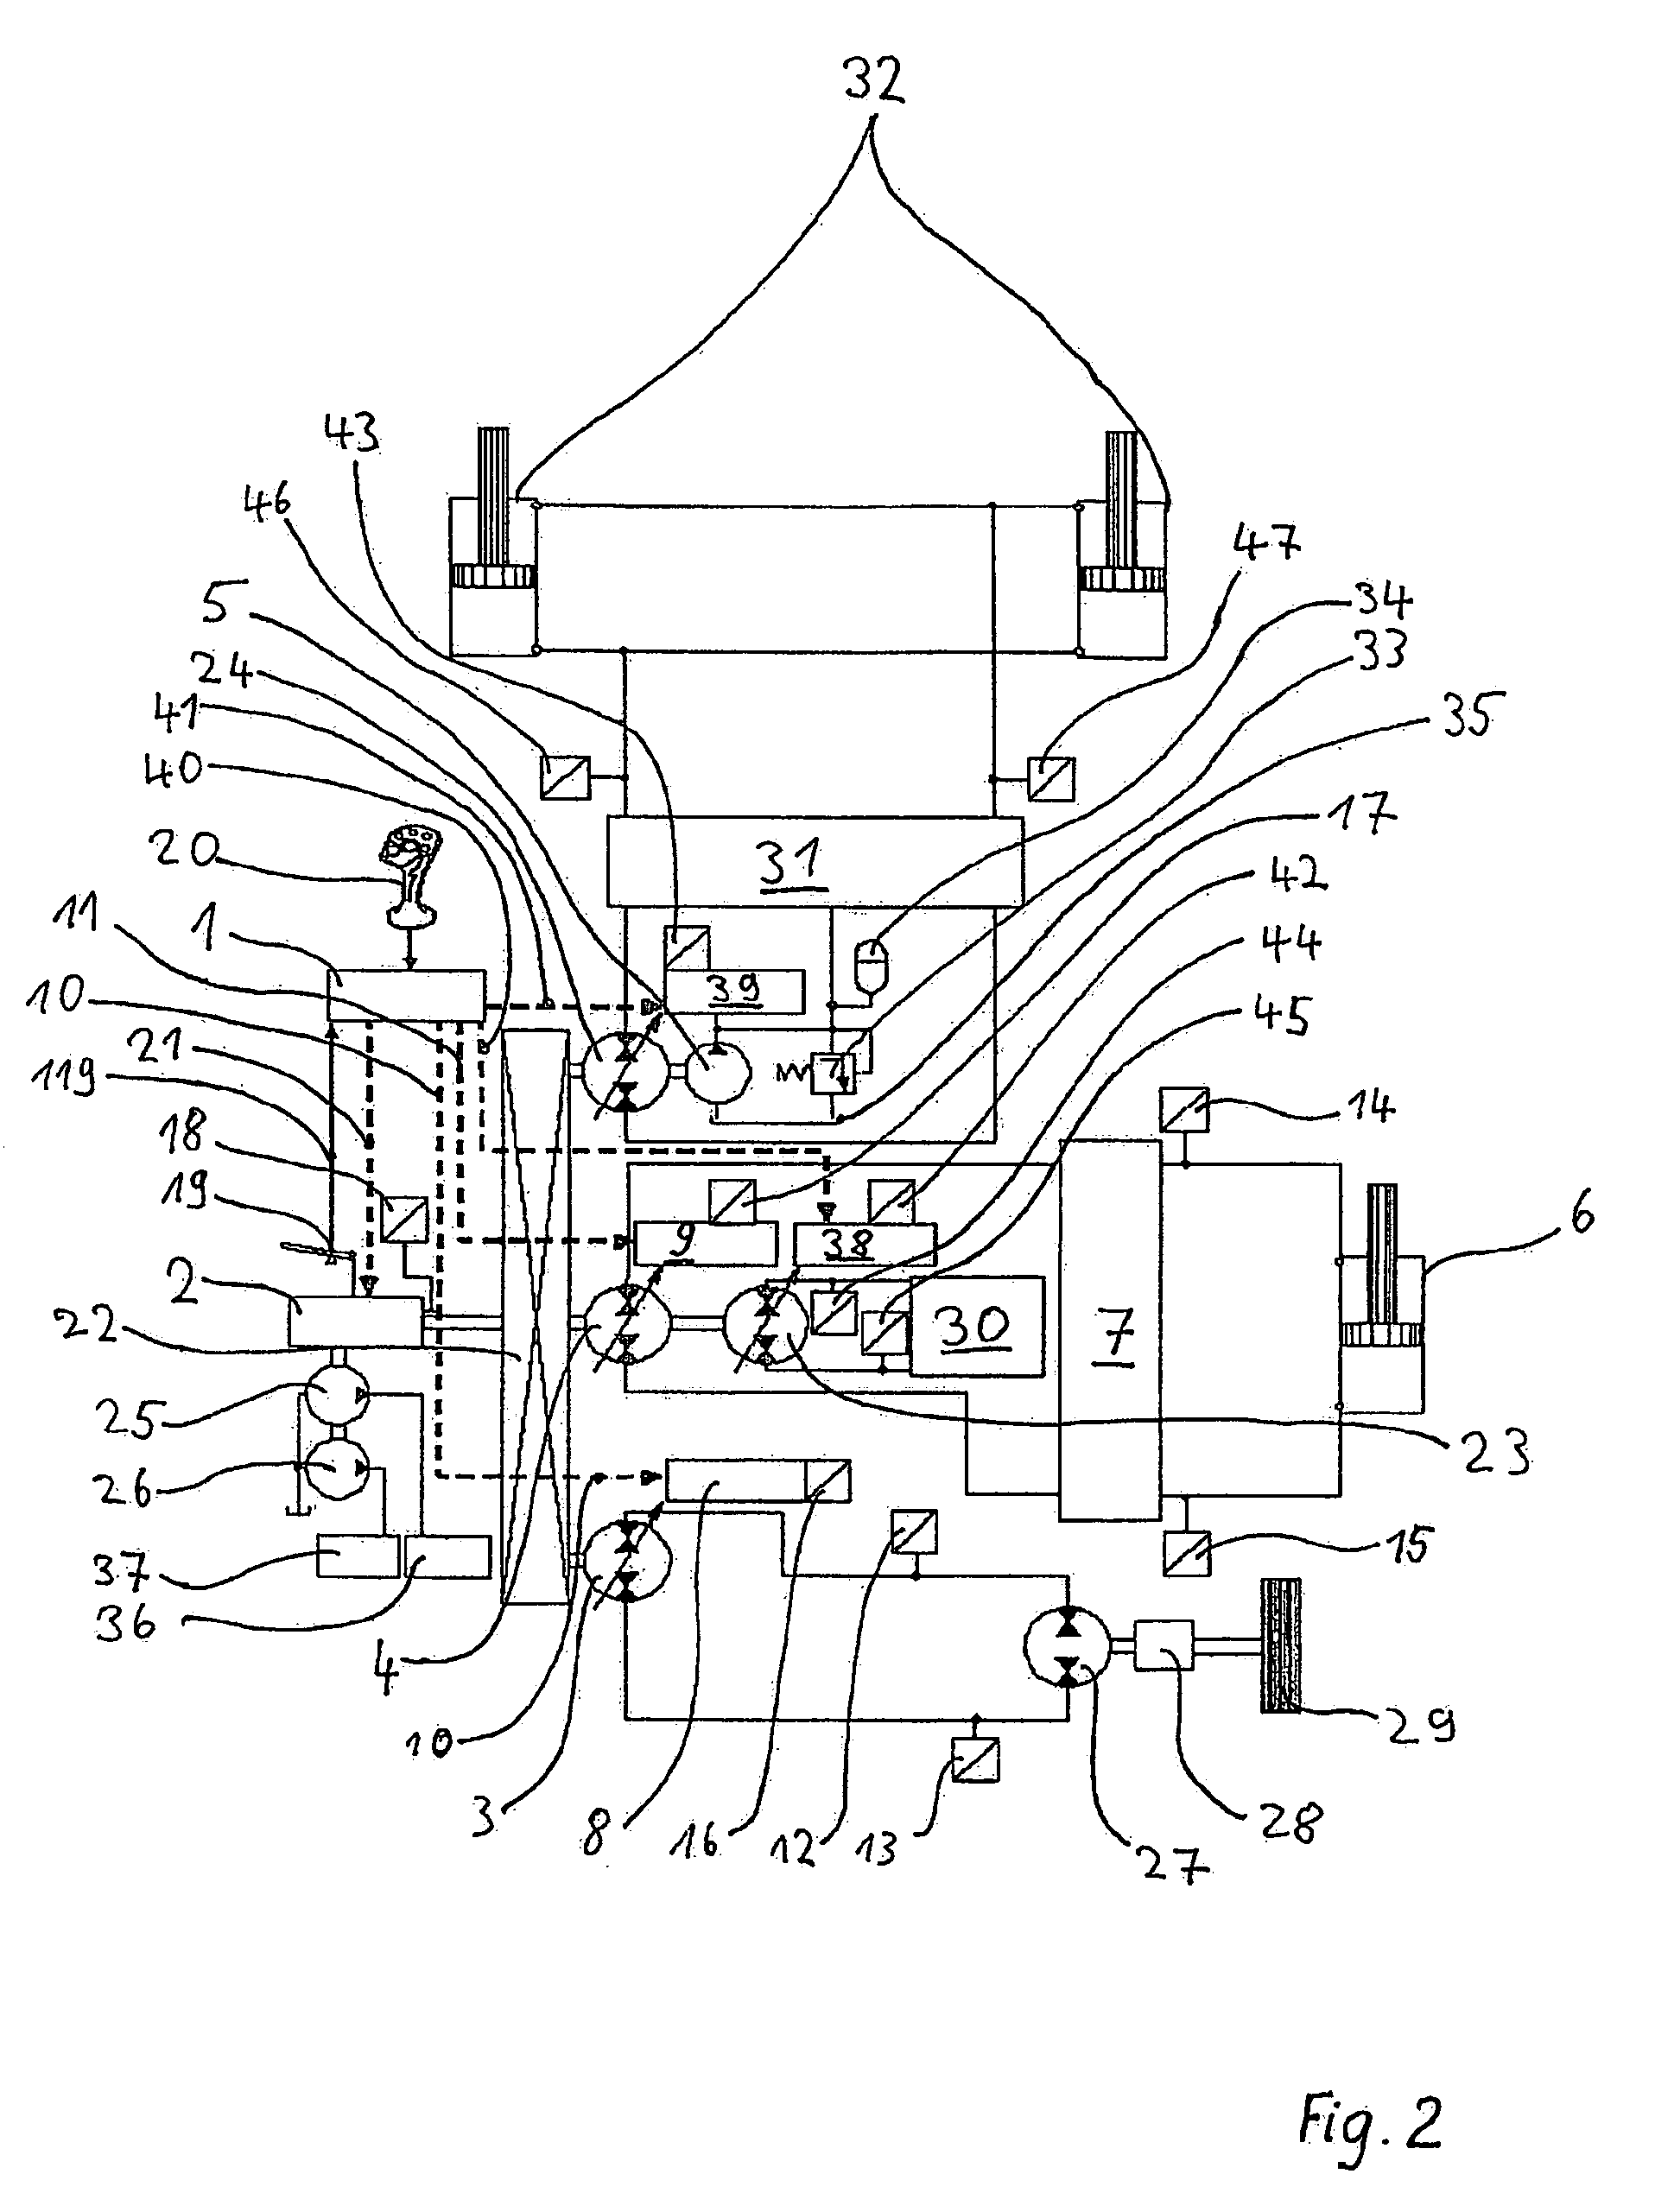 Method for controlling a hydraulic system of a mobile working machine